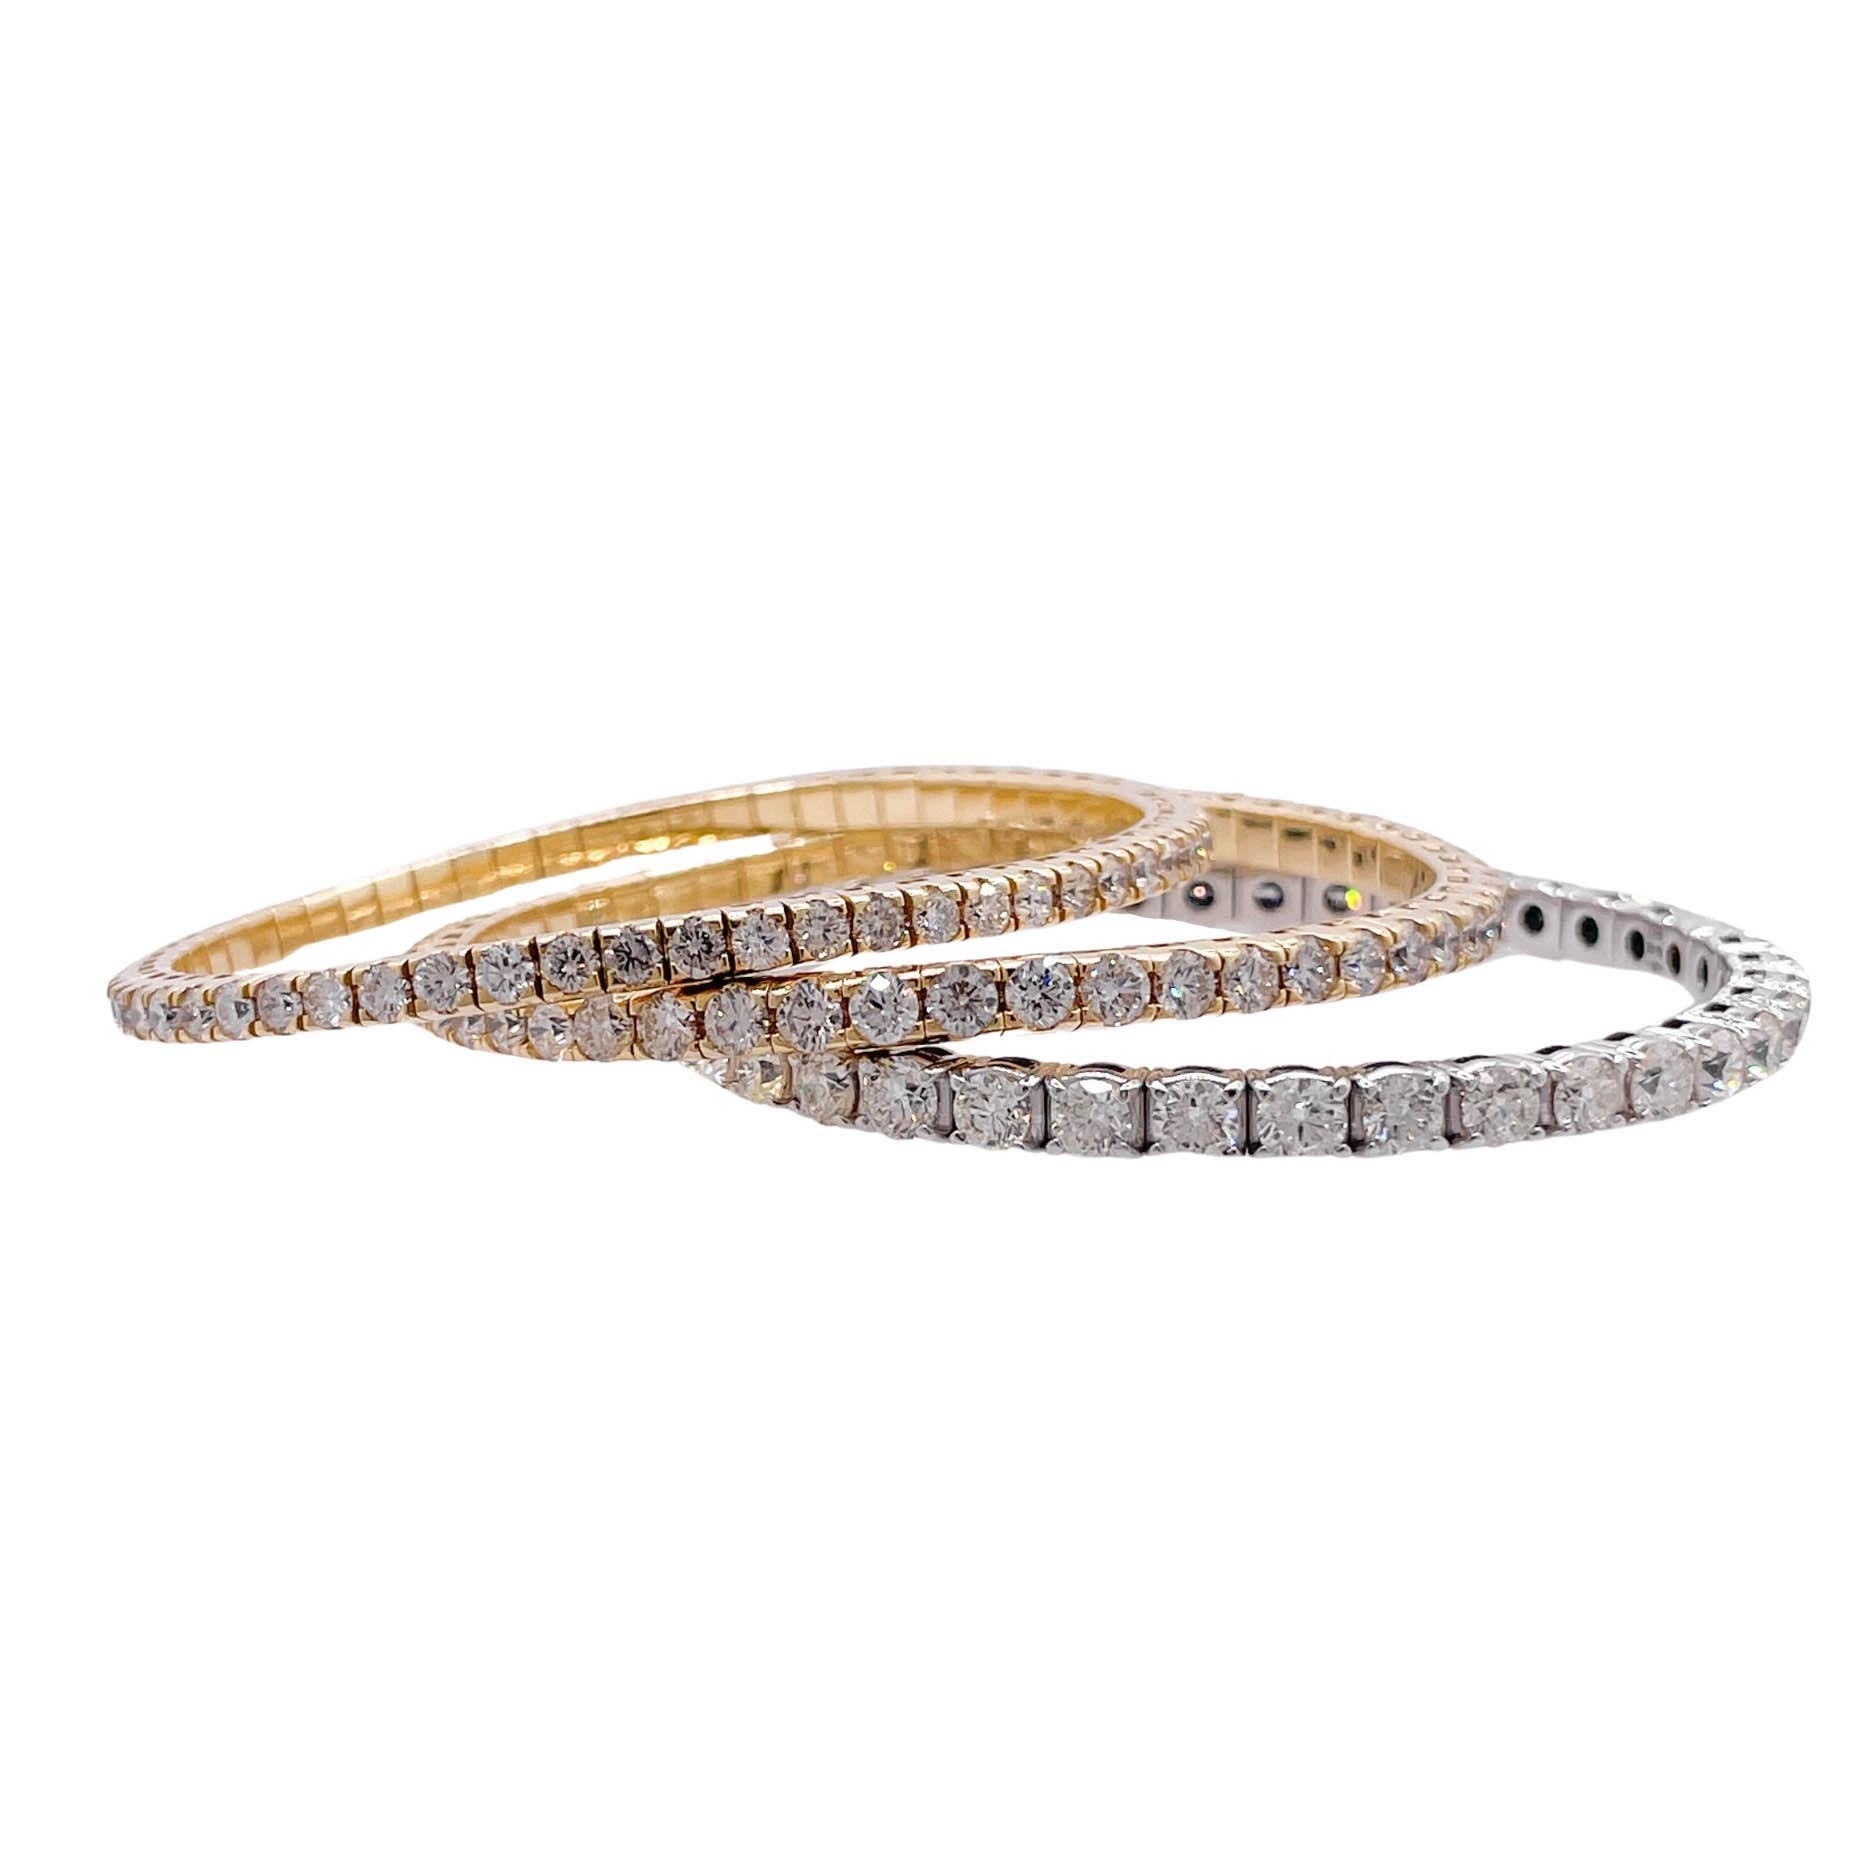 Jay Feder 18k Yellow Gold Round Diamond Stretchy Tennis Bangle Bracelet In Excellent Condition For Sale In Boca Raton, FL